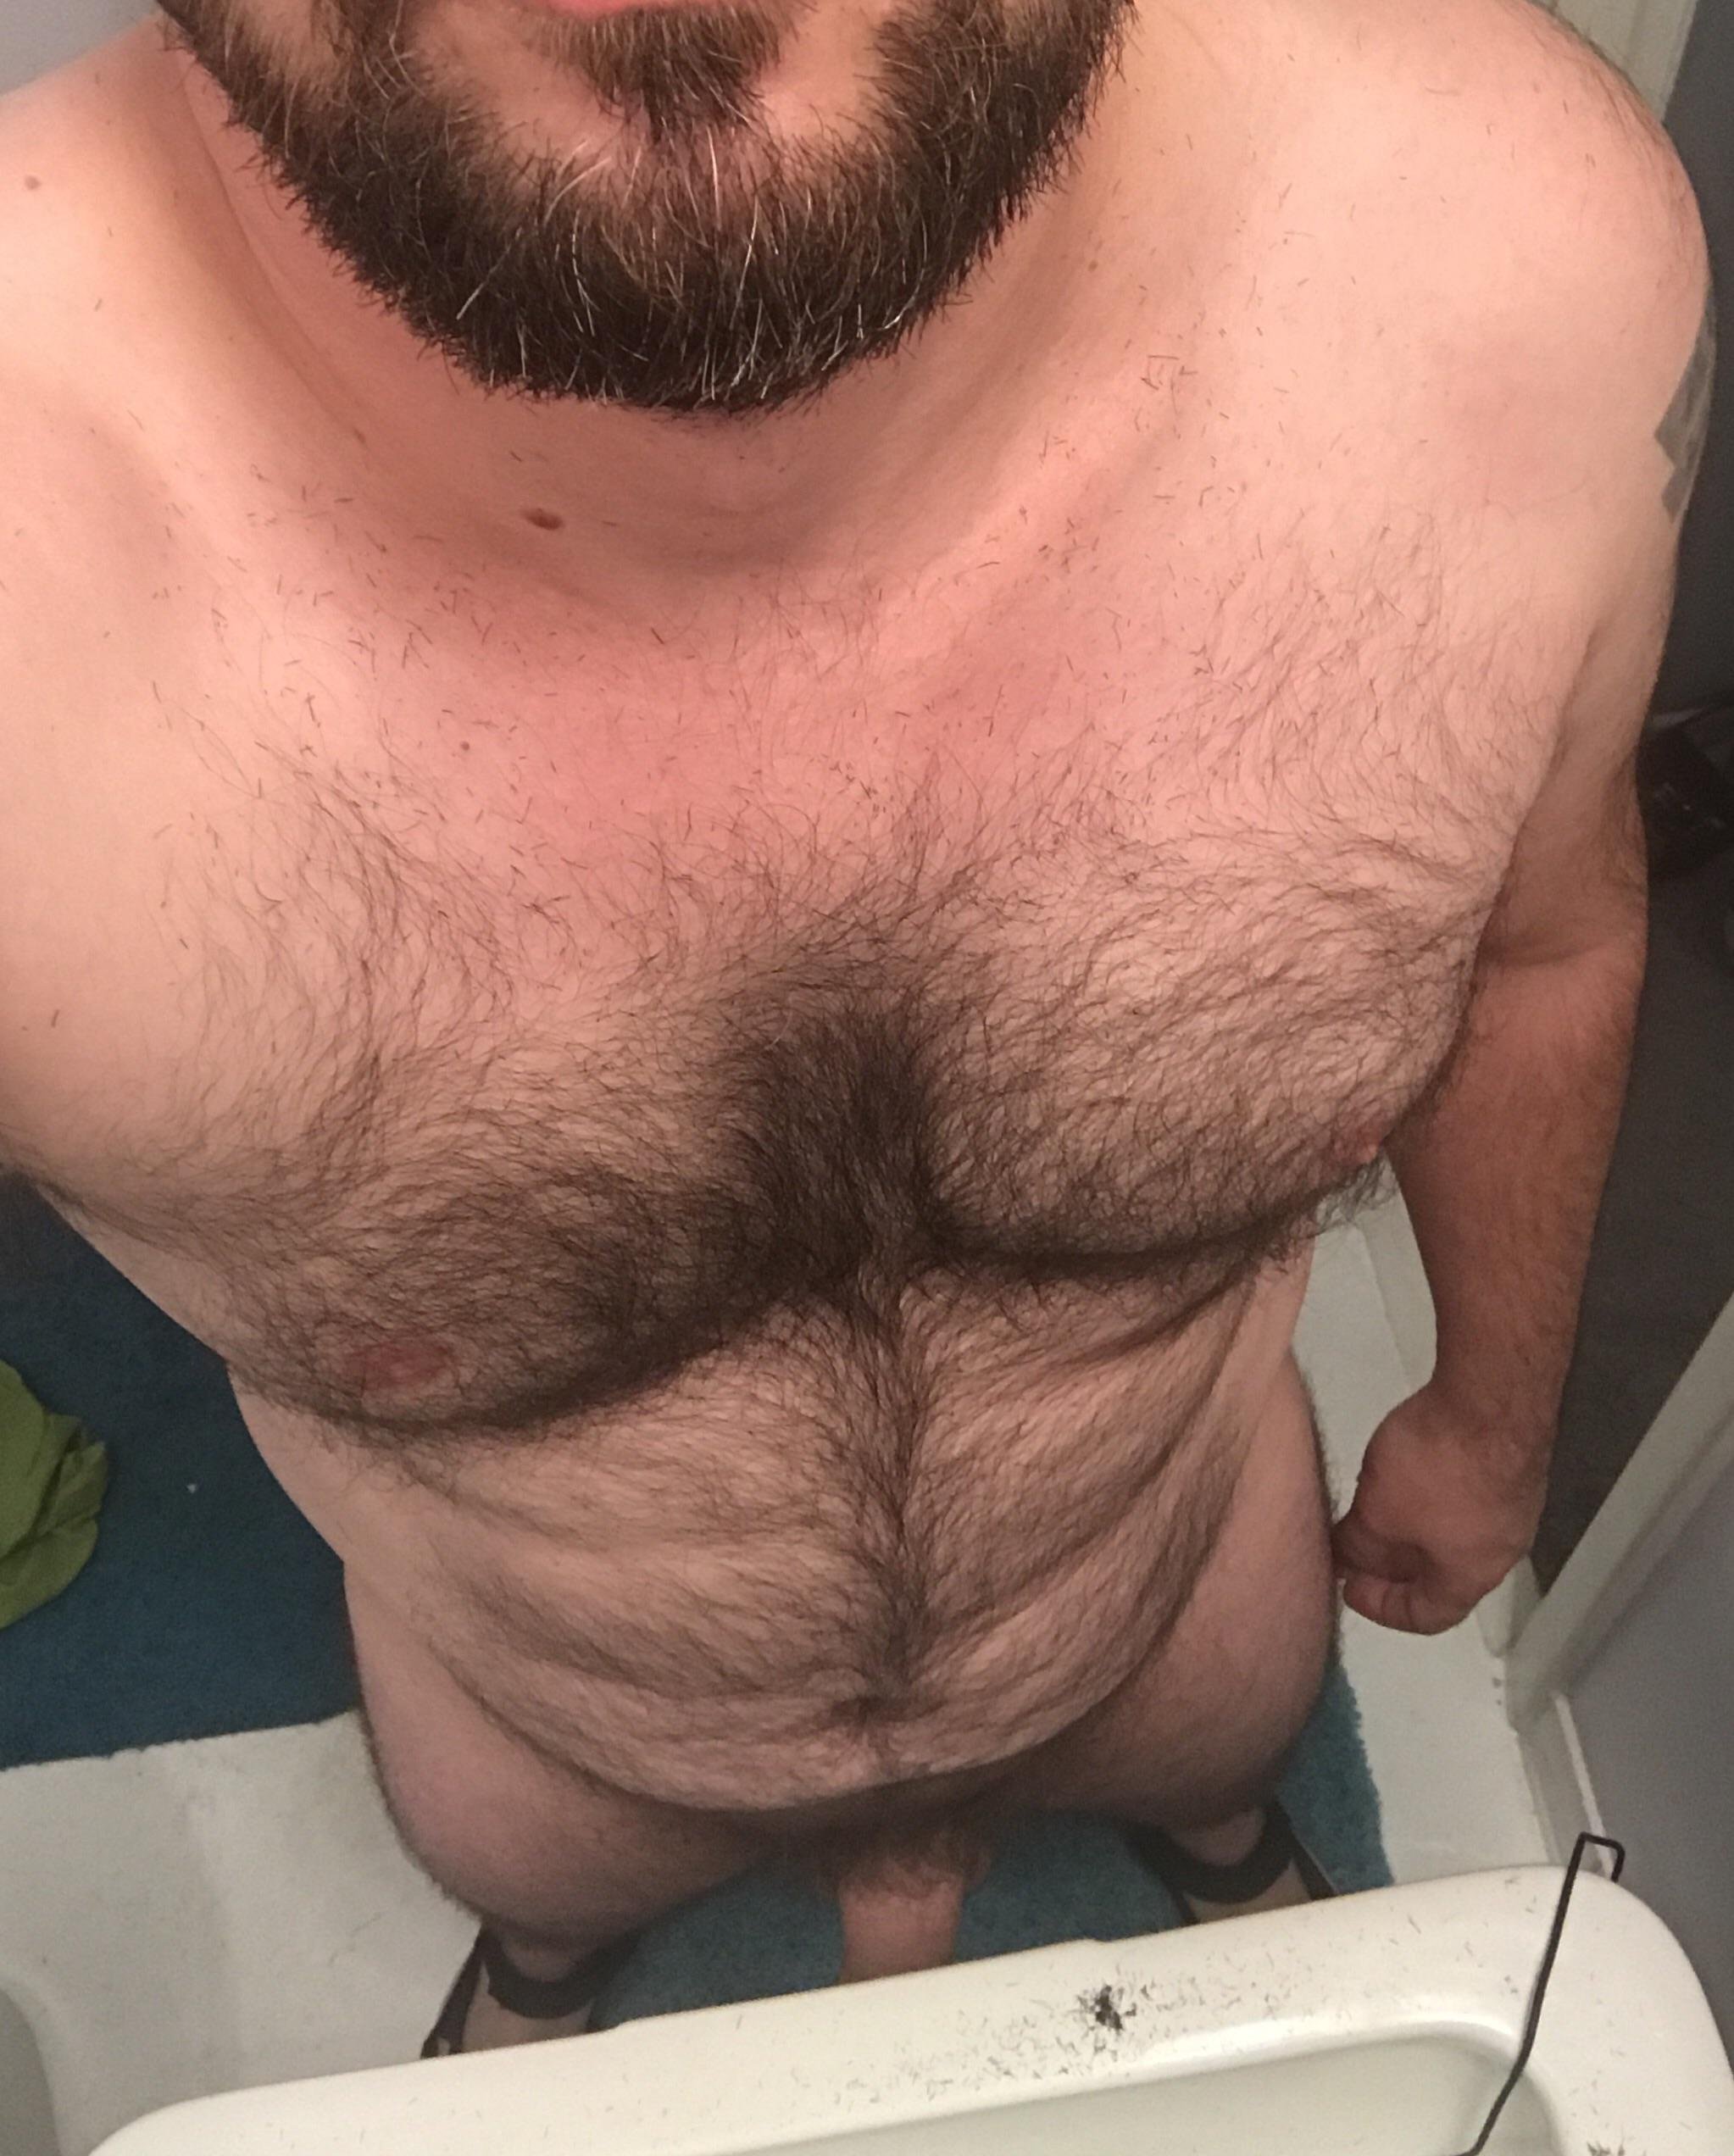 Grooming...And I have a hard time accepting my dad bod.